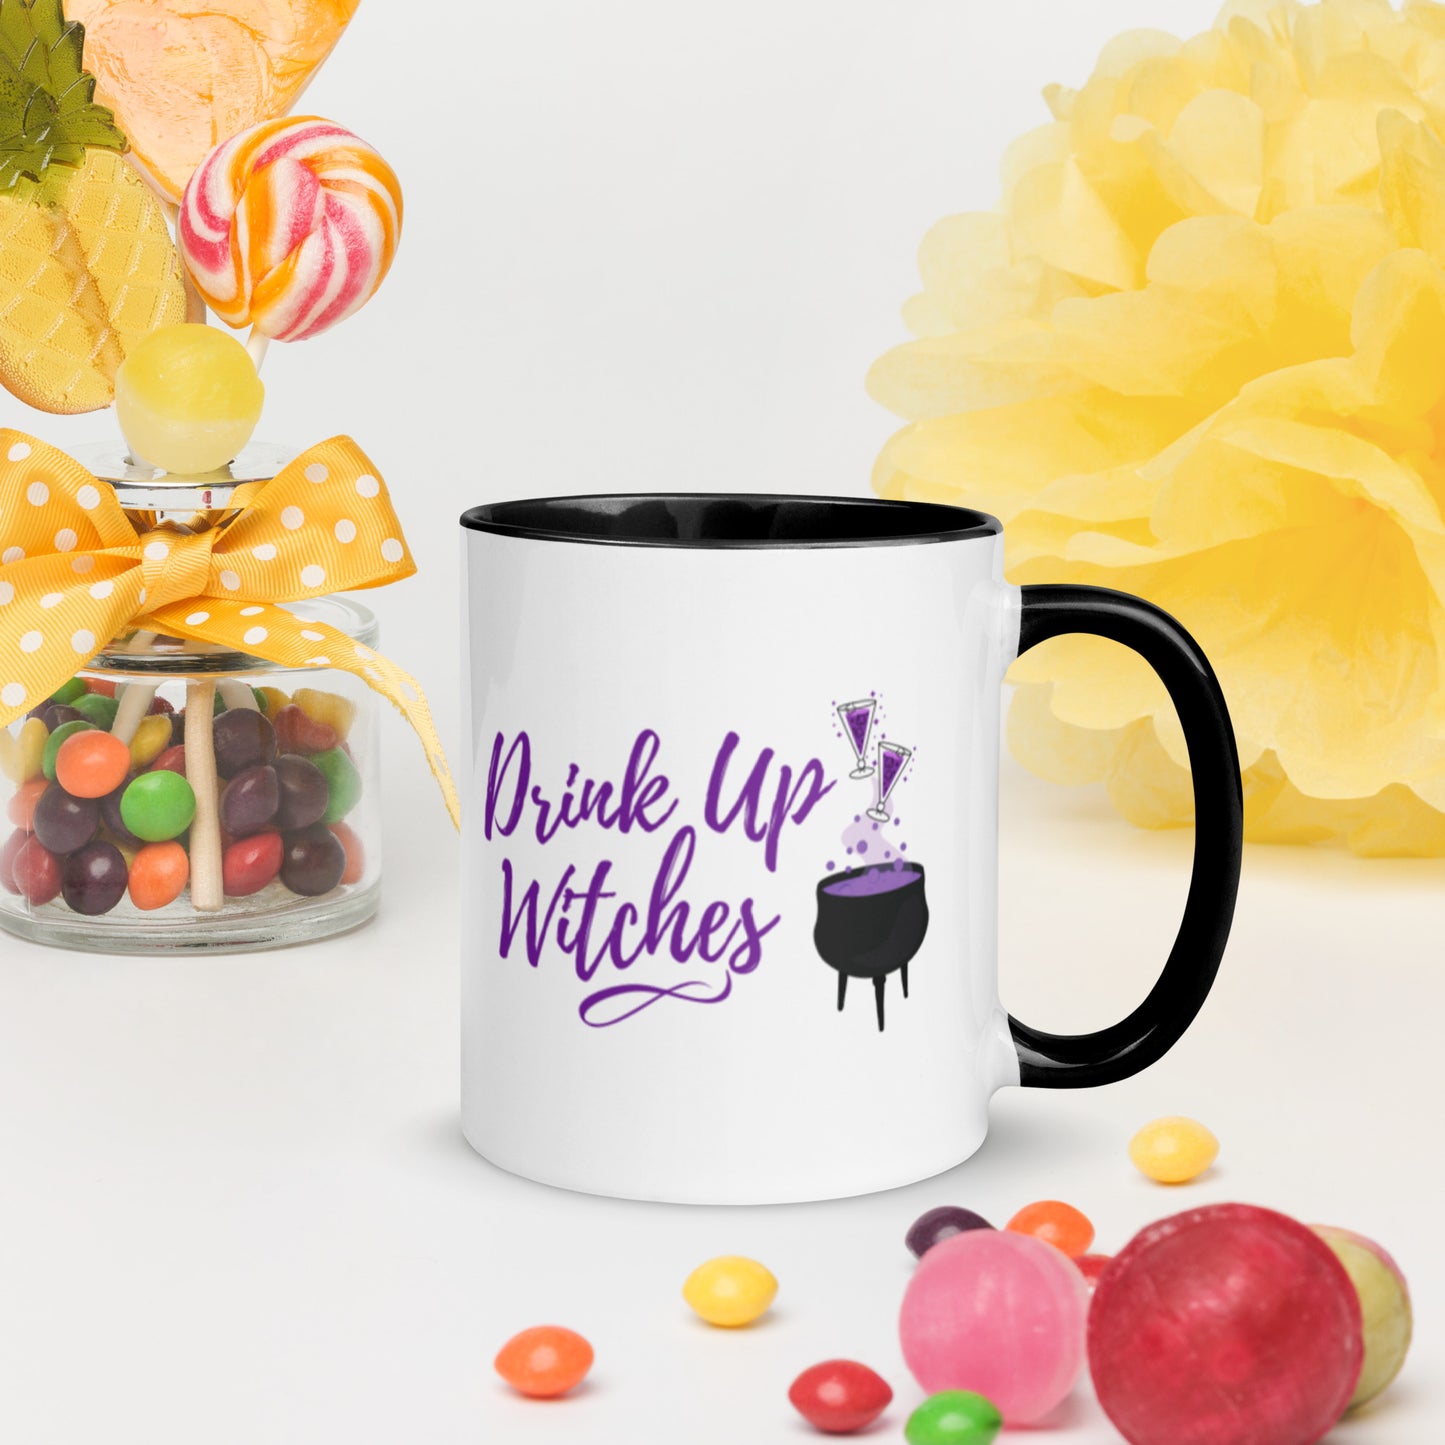 Mug: Drink Up Witches